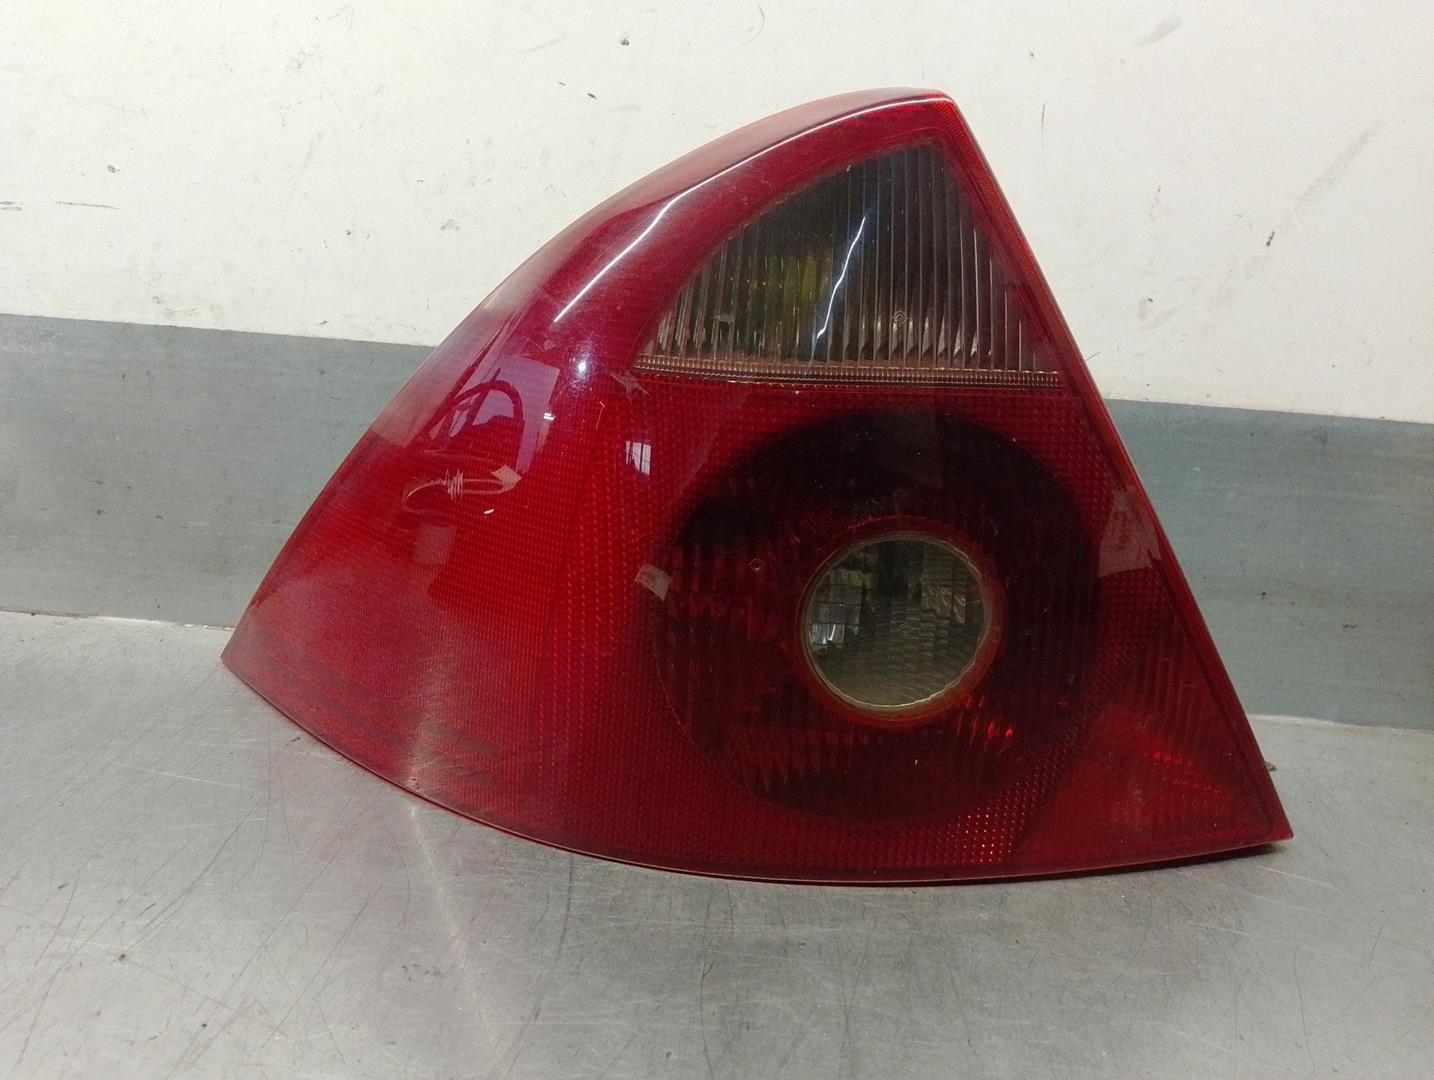 FORD Mondeo 3 generation (2000-2007) Rear Left Taillight 1S7113405A, 5PUERTAS 24578346